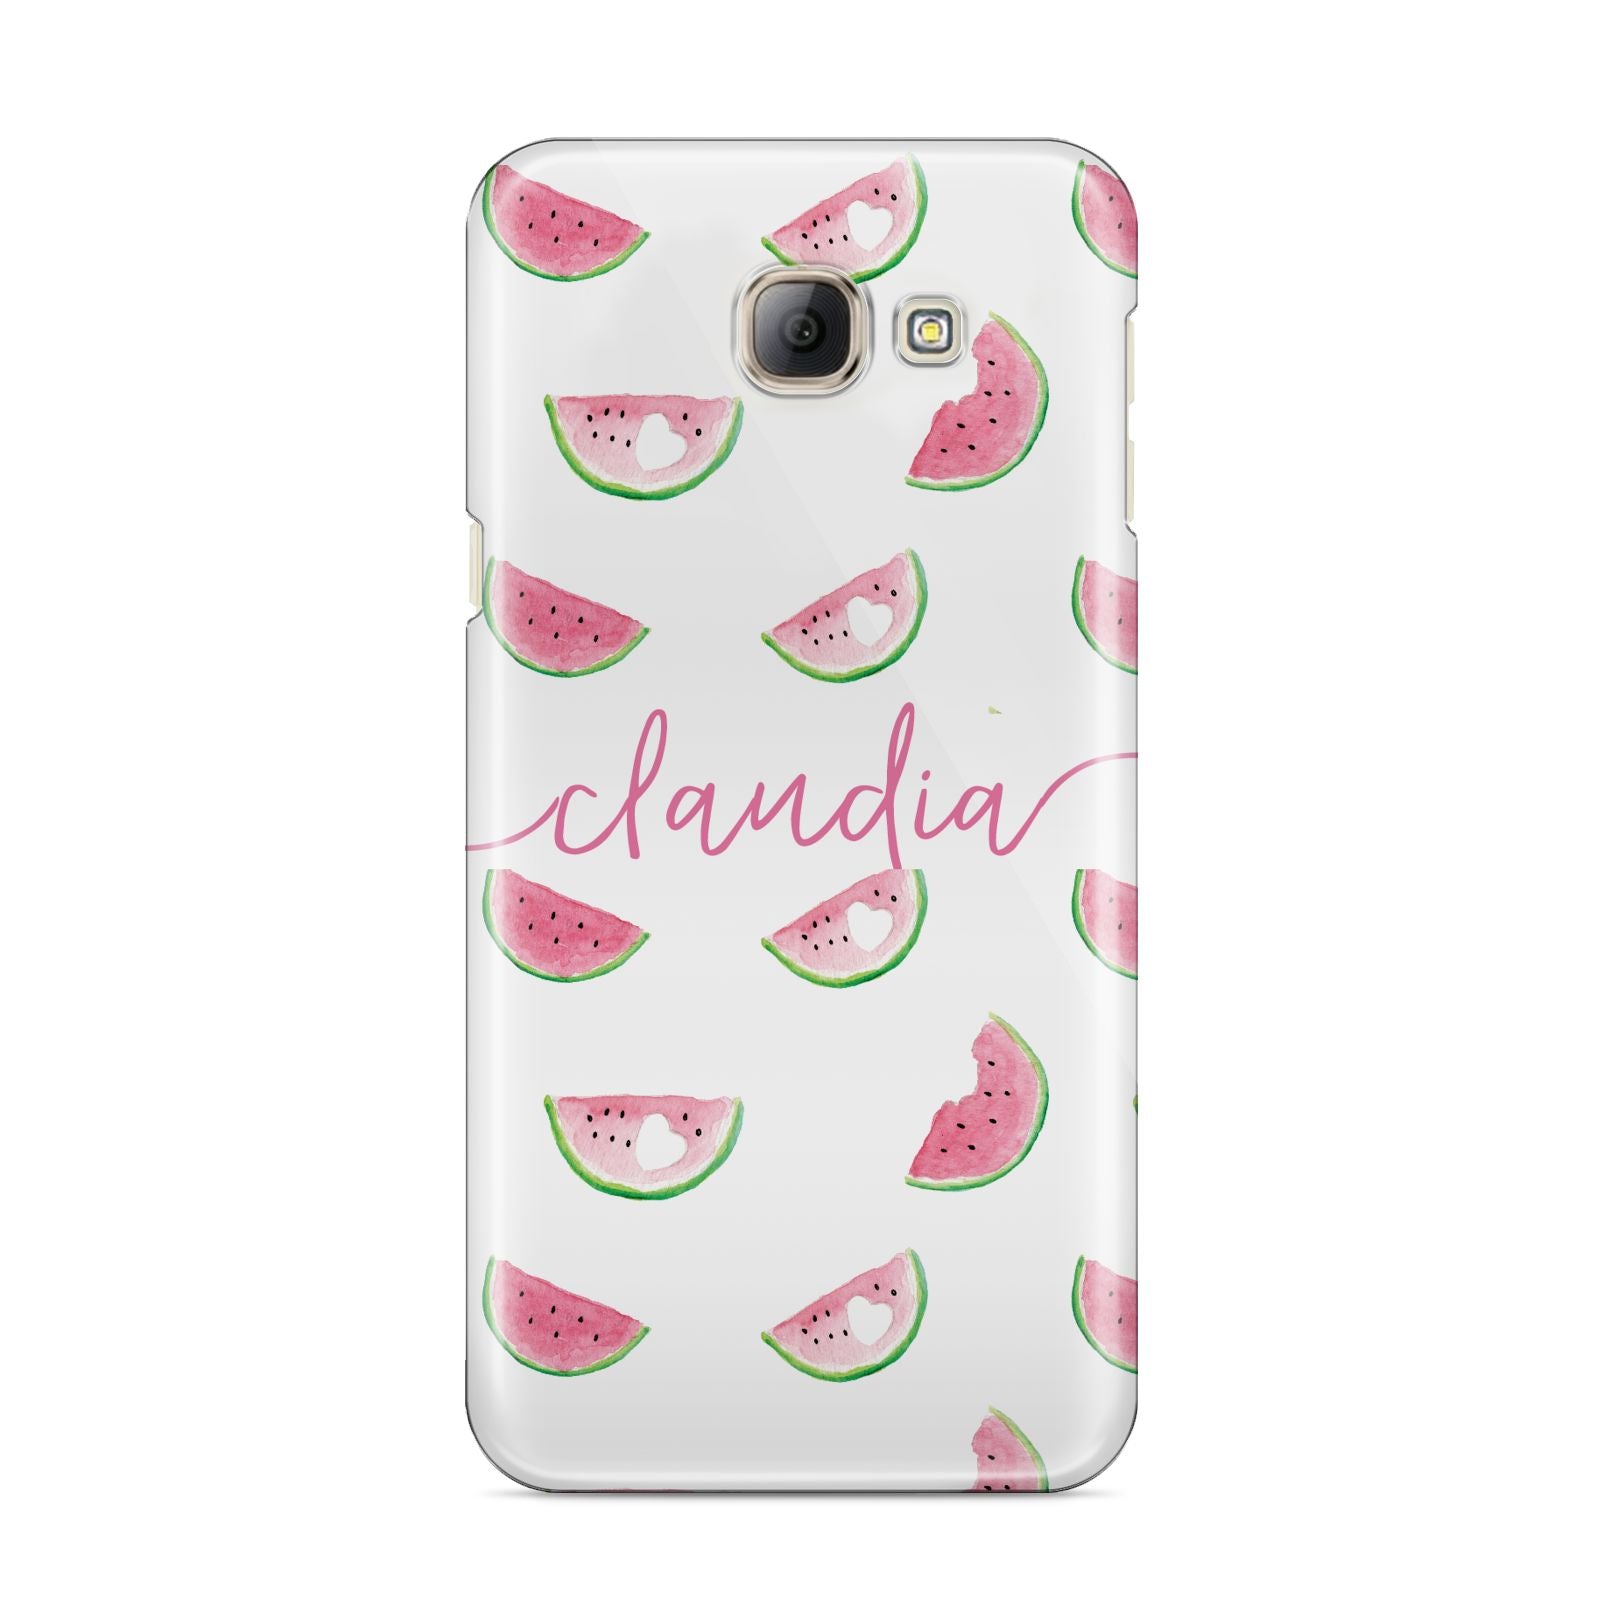 Personalised Transparent Watermelon Samsung Galaxy A8 2016 Case